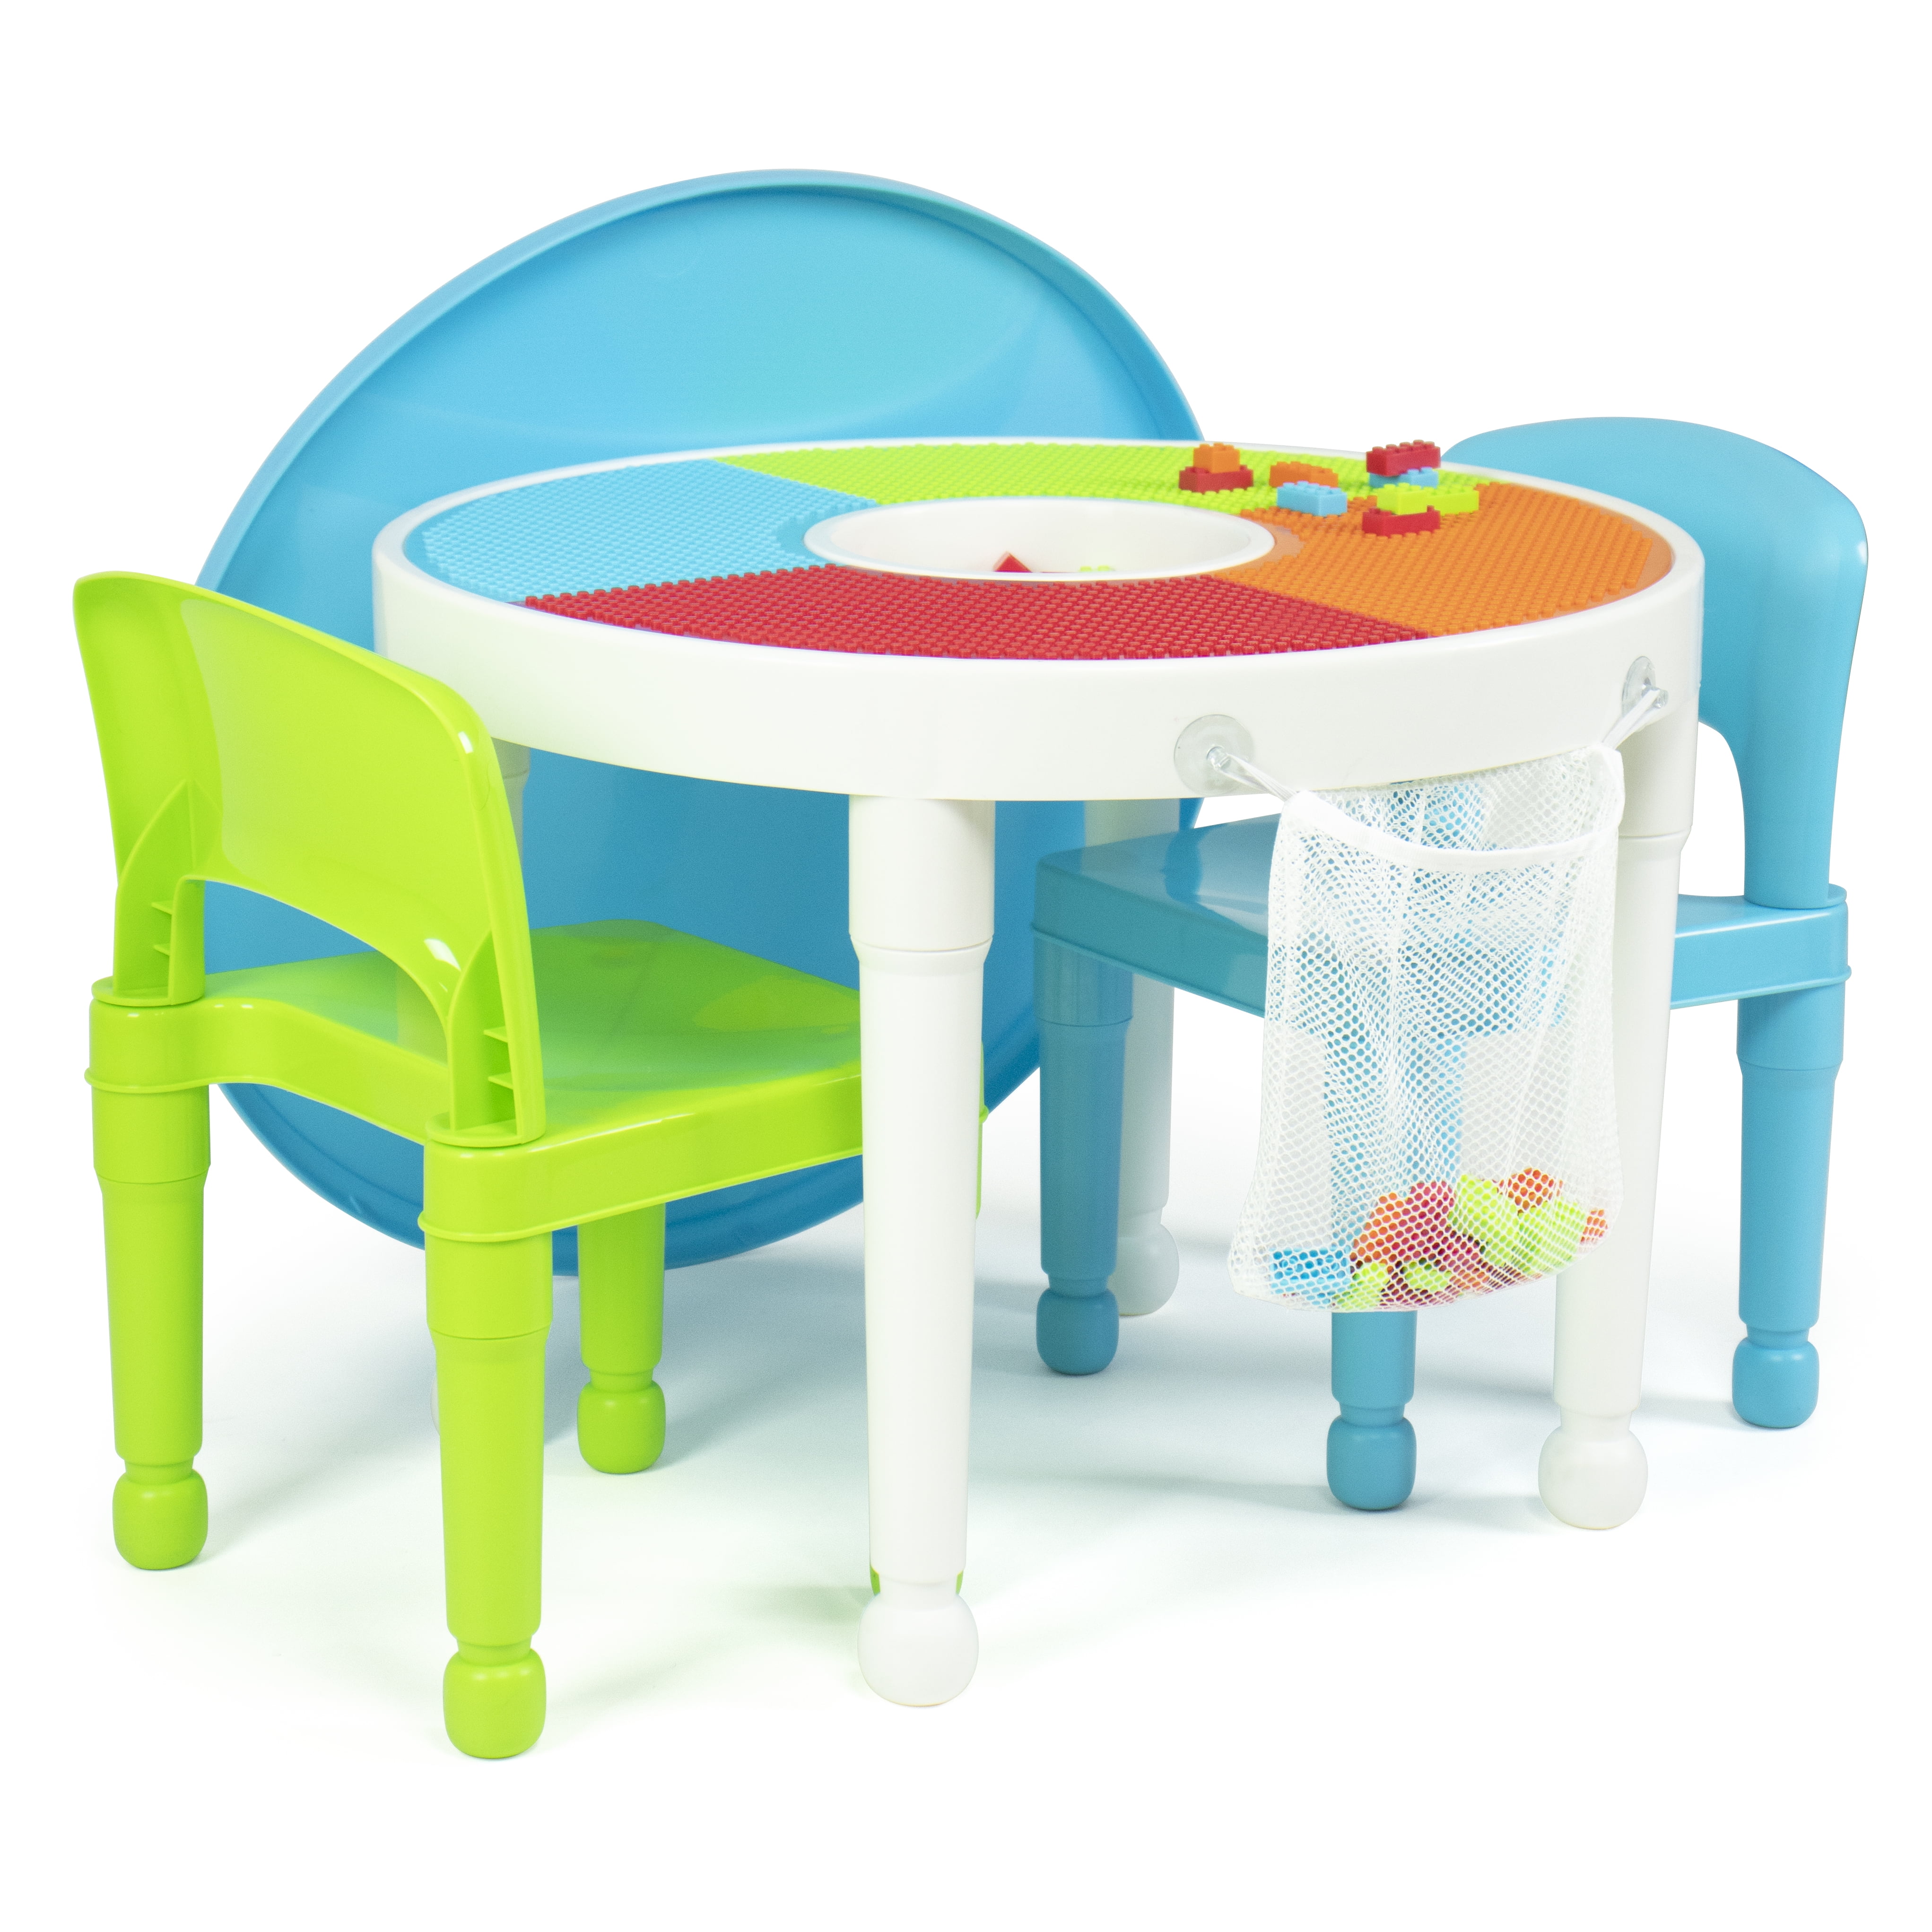 Tot Tutors Kids 2-in-1 Plastic Lego-Compatible Activity Table and 2 Chairs Set